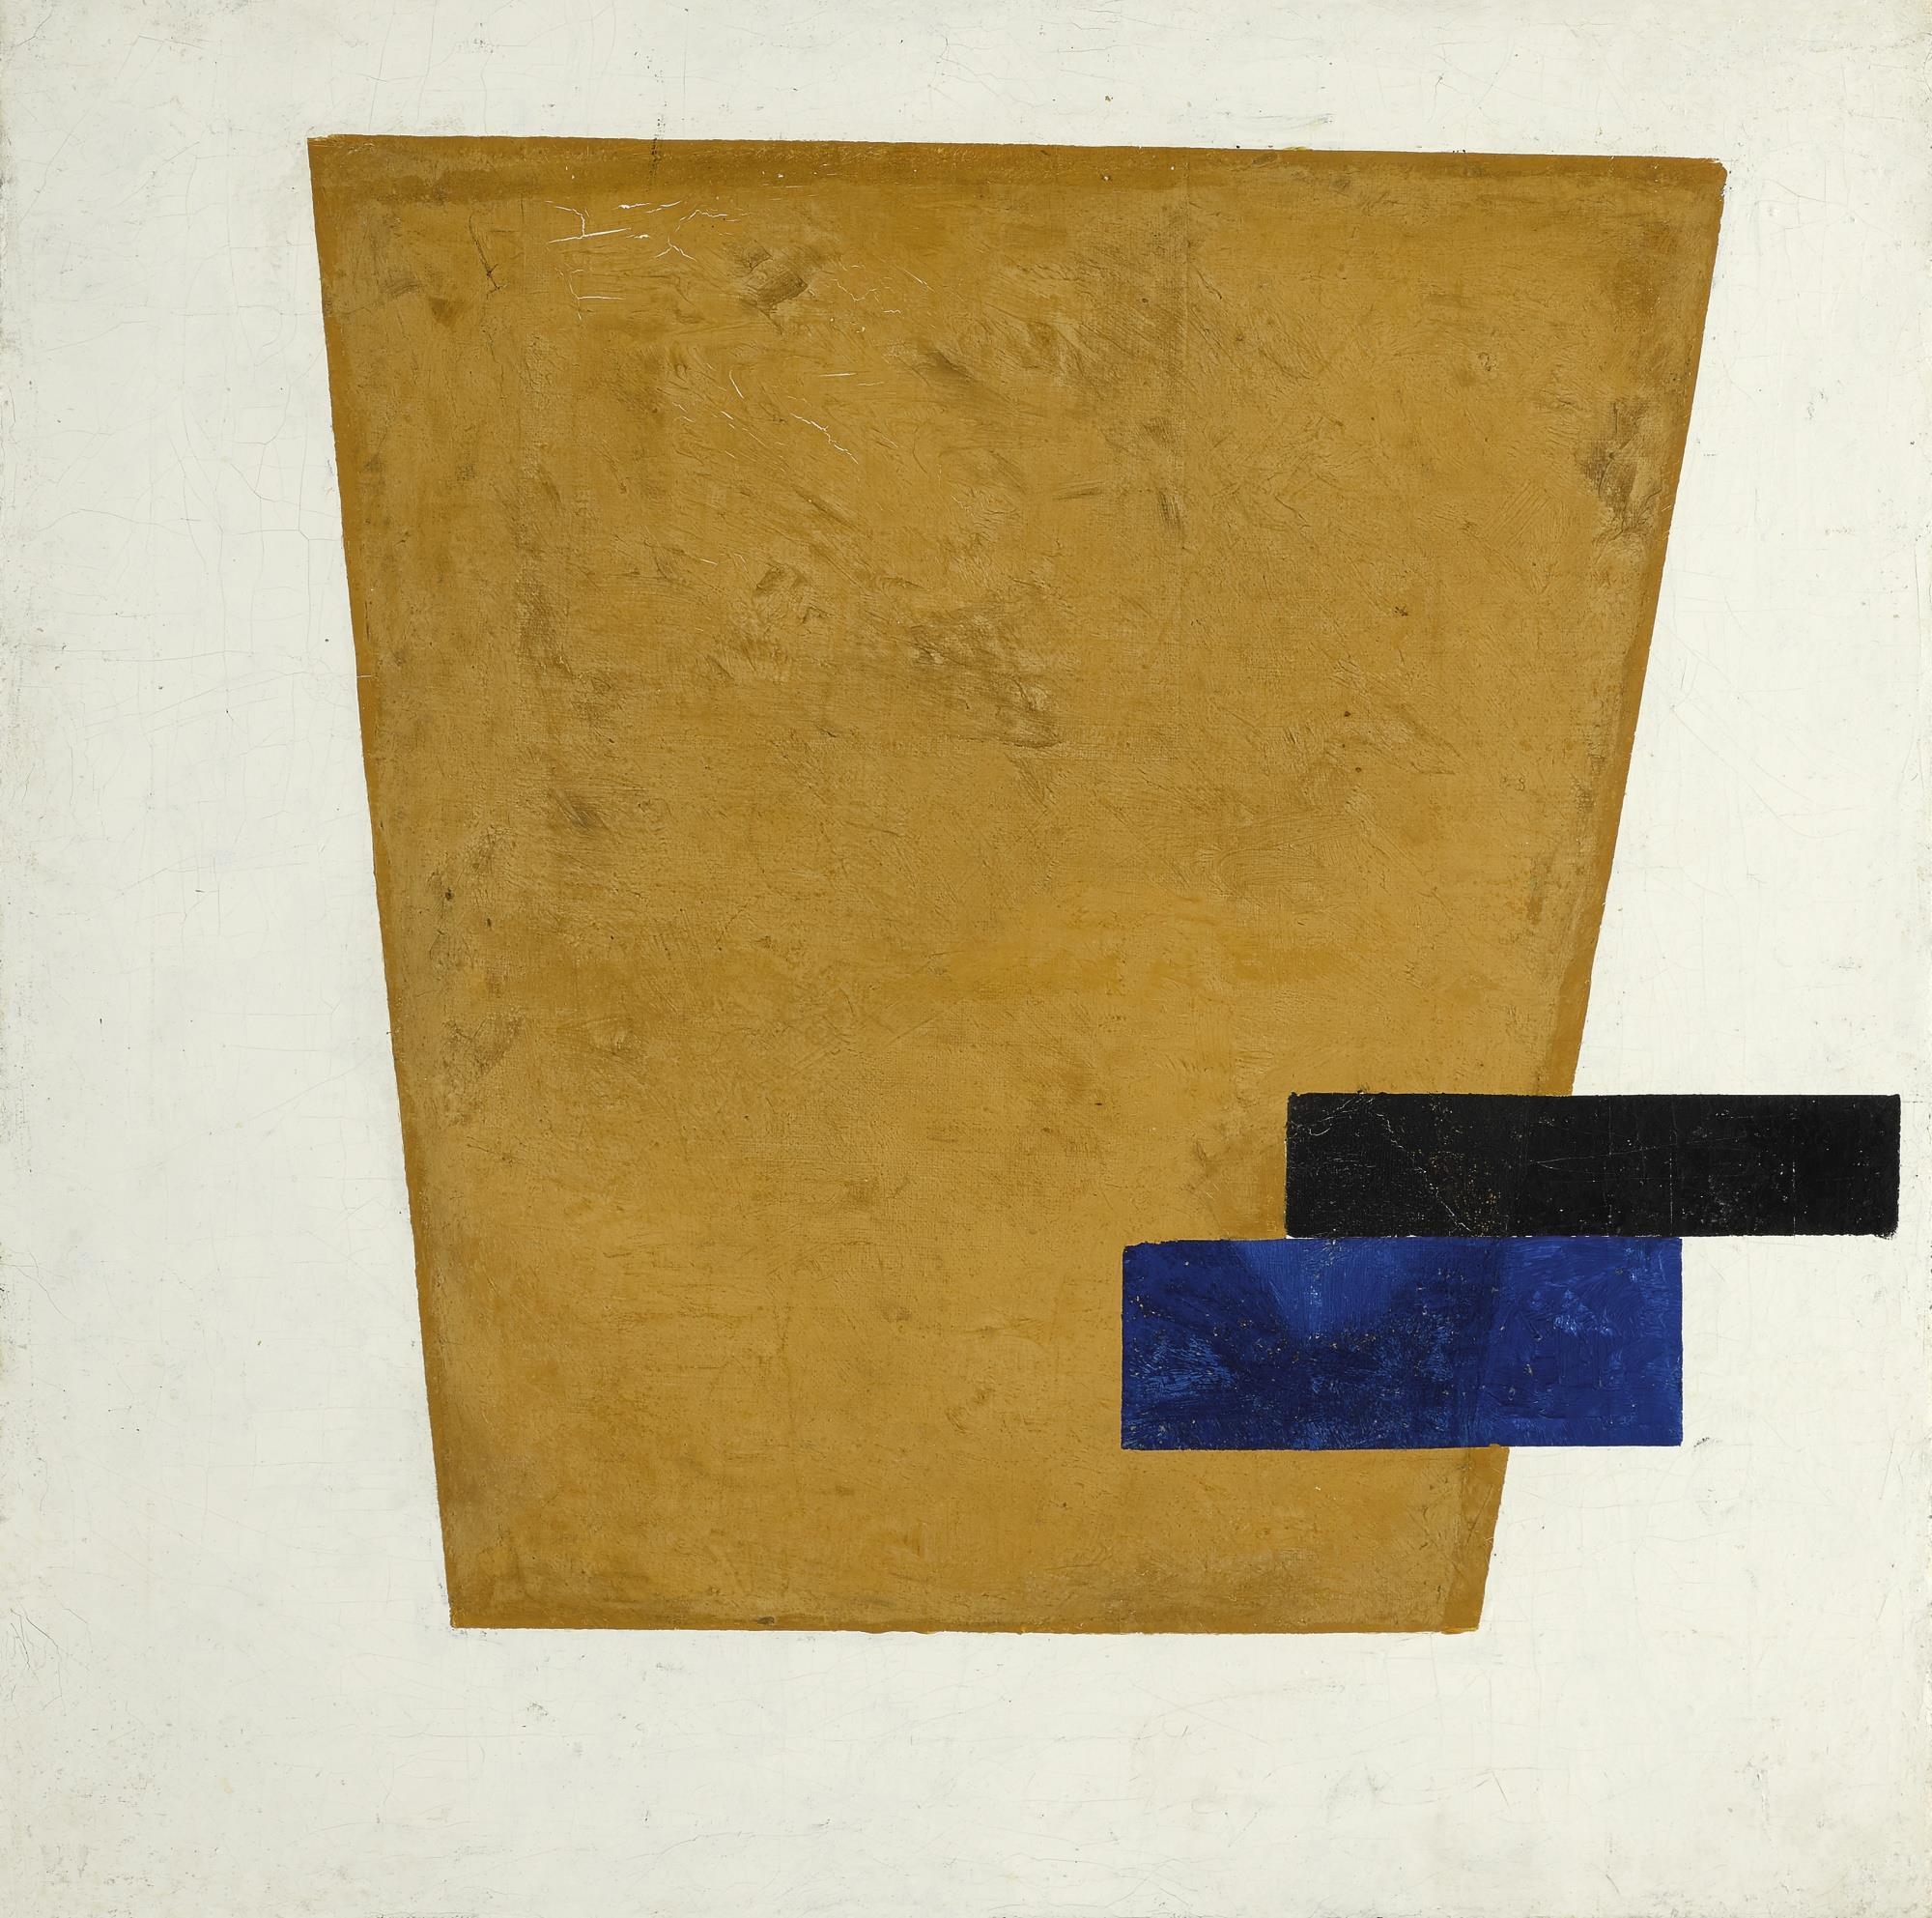 SUPREMATIST COMPOSITION WITH PLANE IN PROJECTION by Kazimir Malevich, 1915